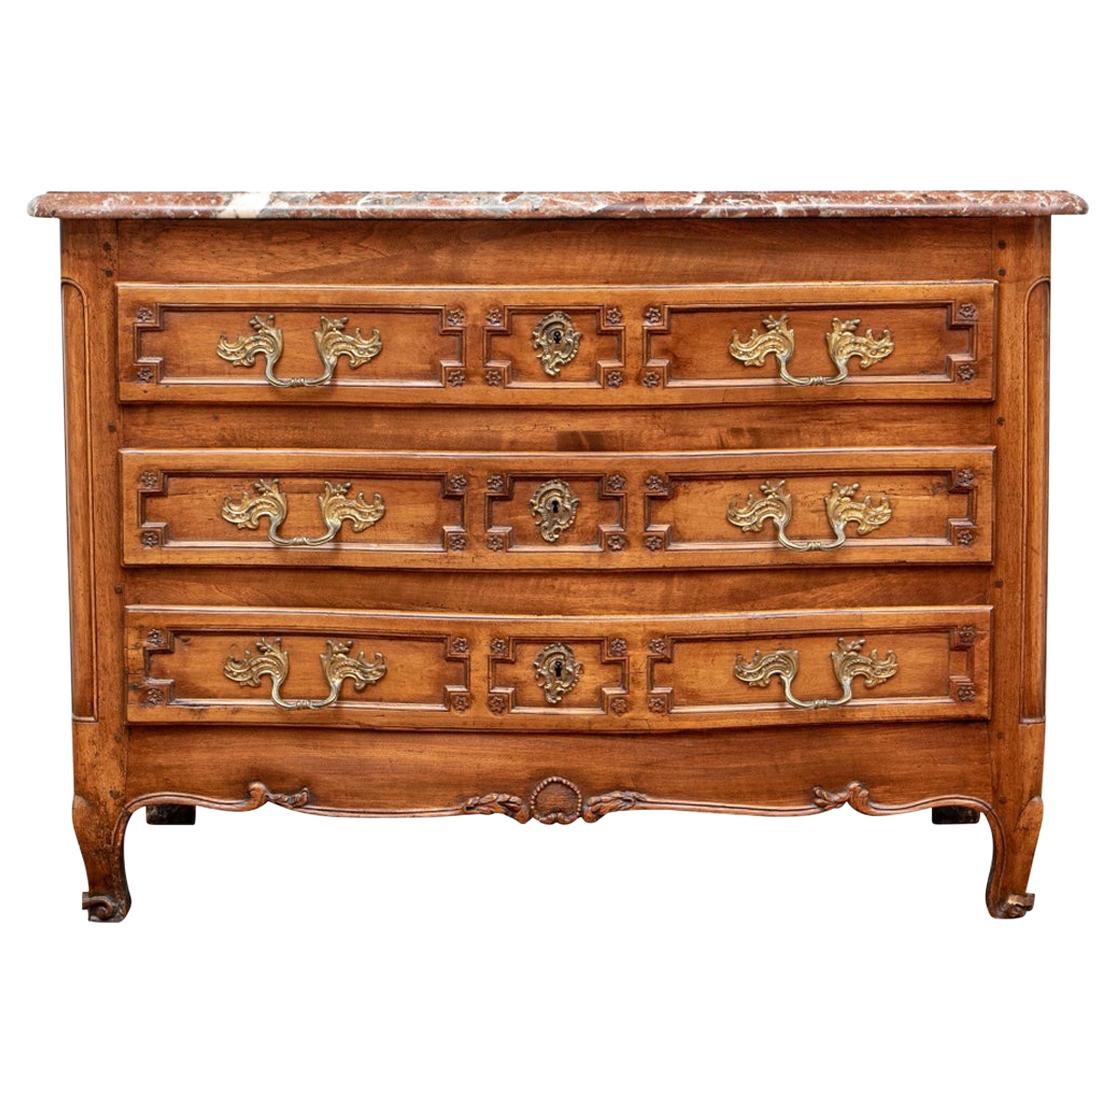 18th Century Carved Walnut Marble-Top Commode